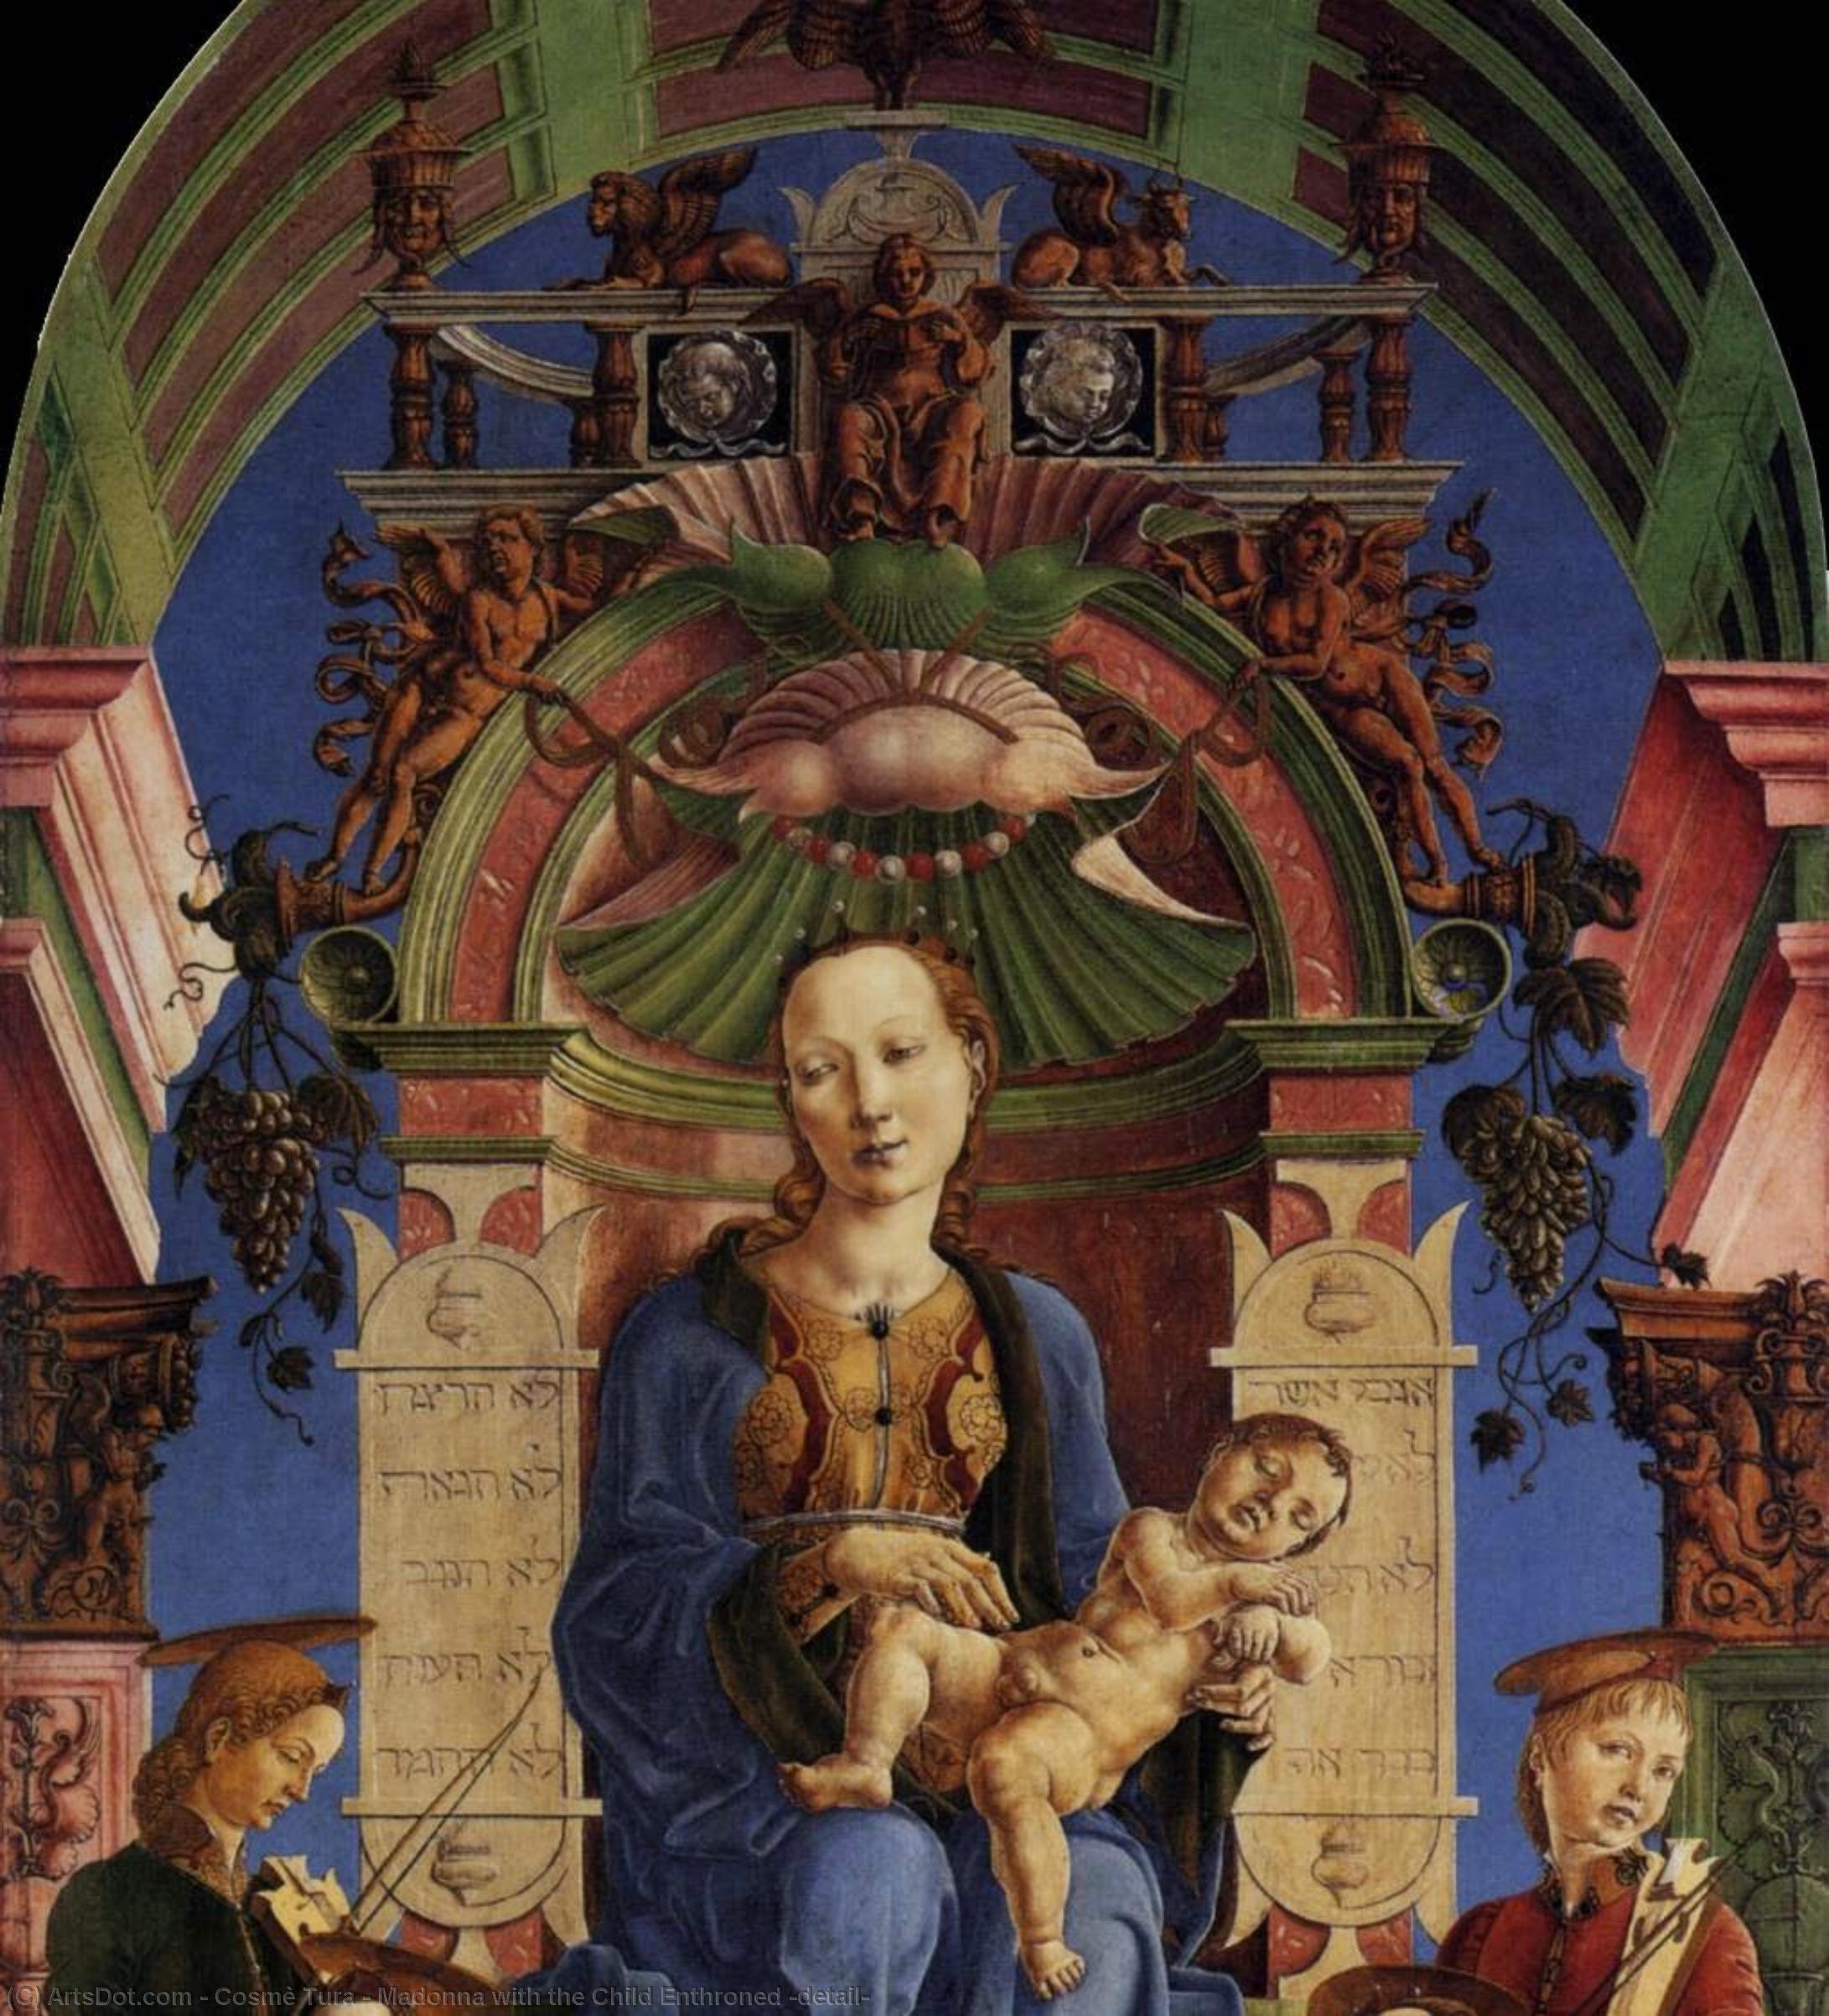 WikiOO.org - 백과 사전 - 회화, 삽화 Cosmè Tura - Madonna with the Child Enthroned (detail)